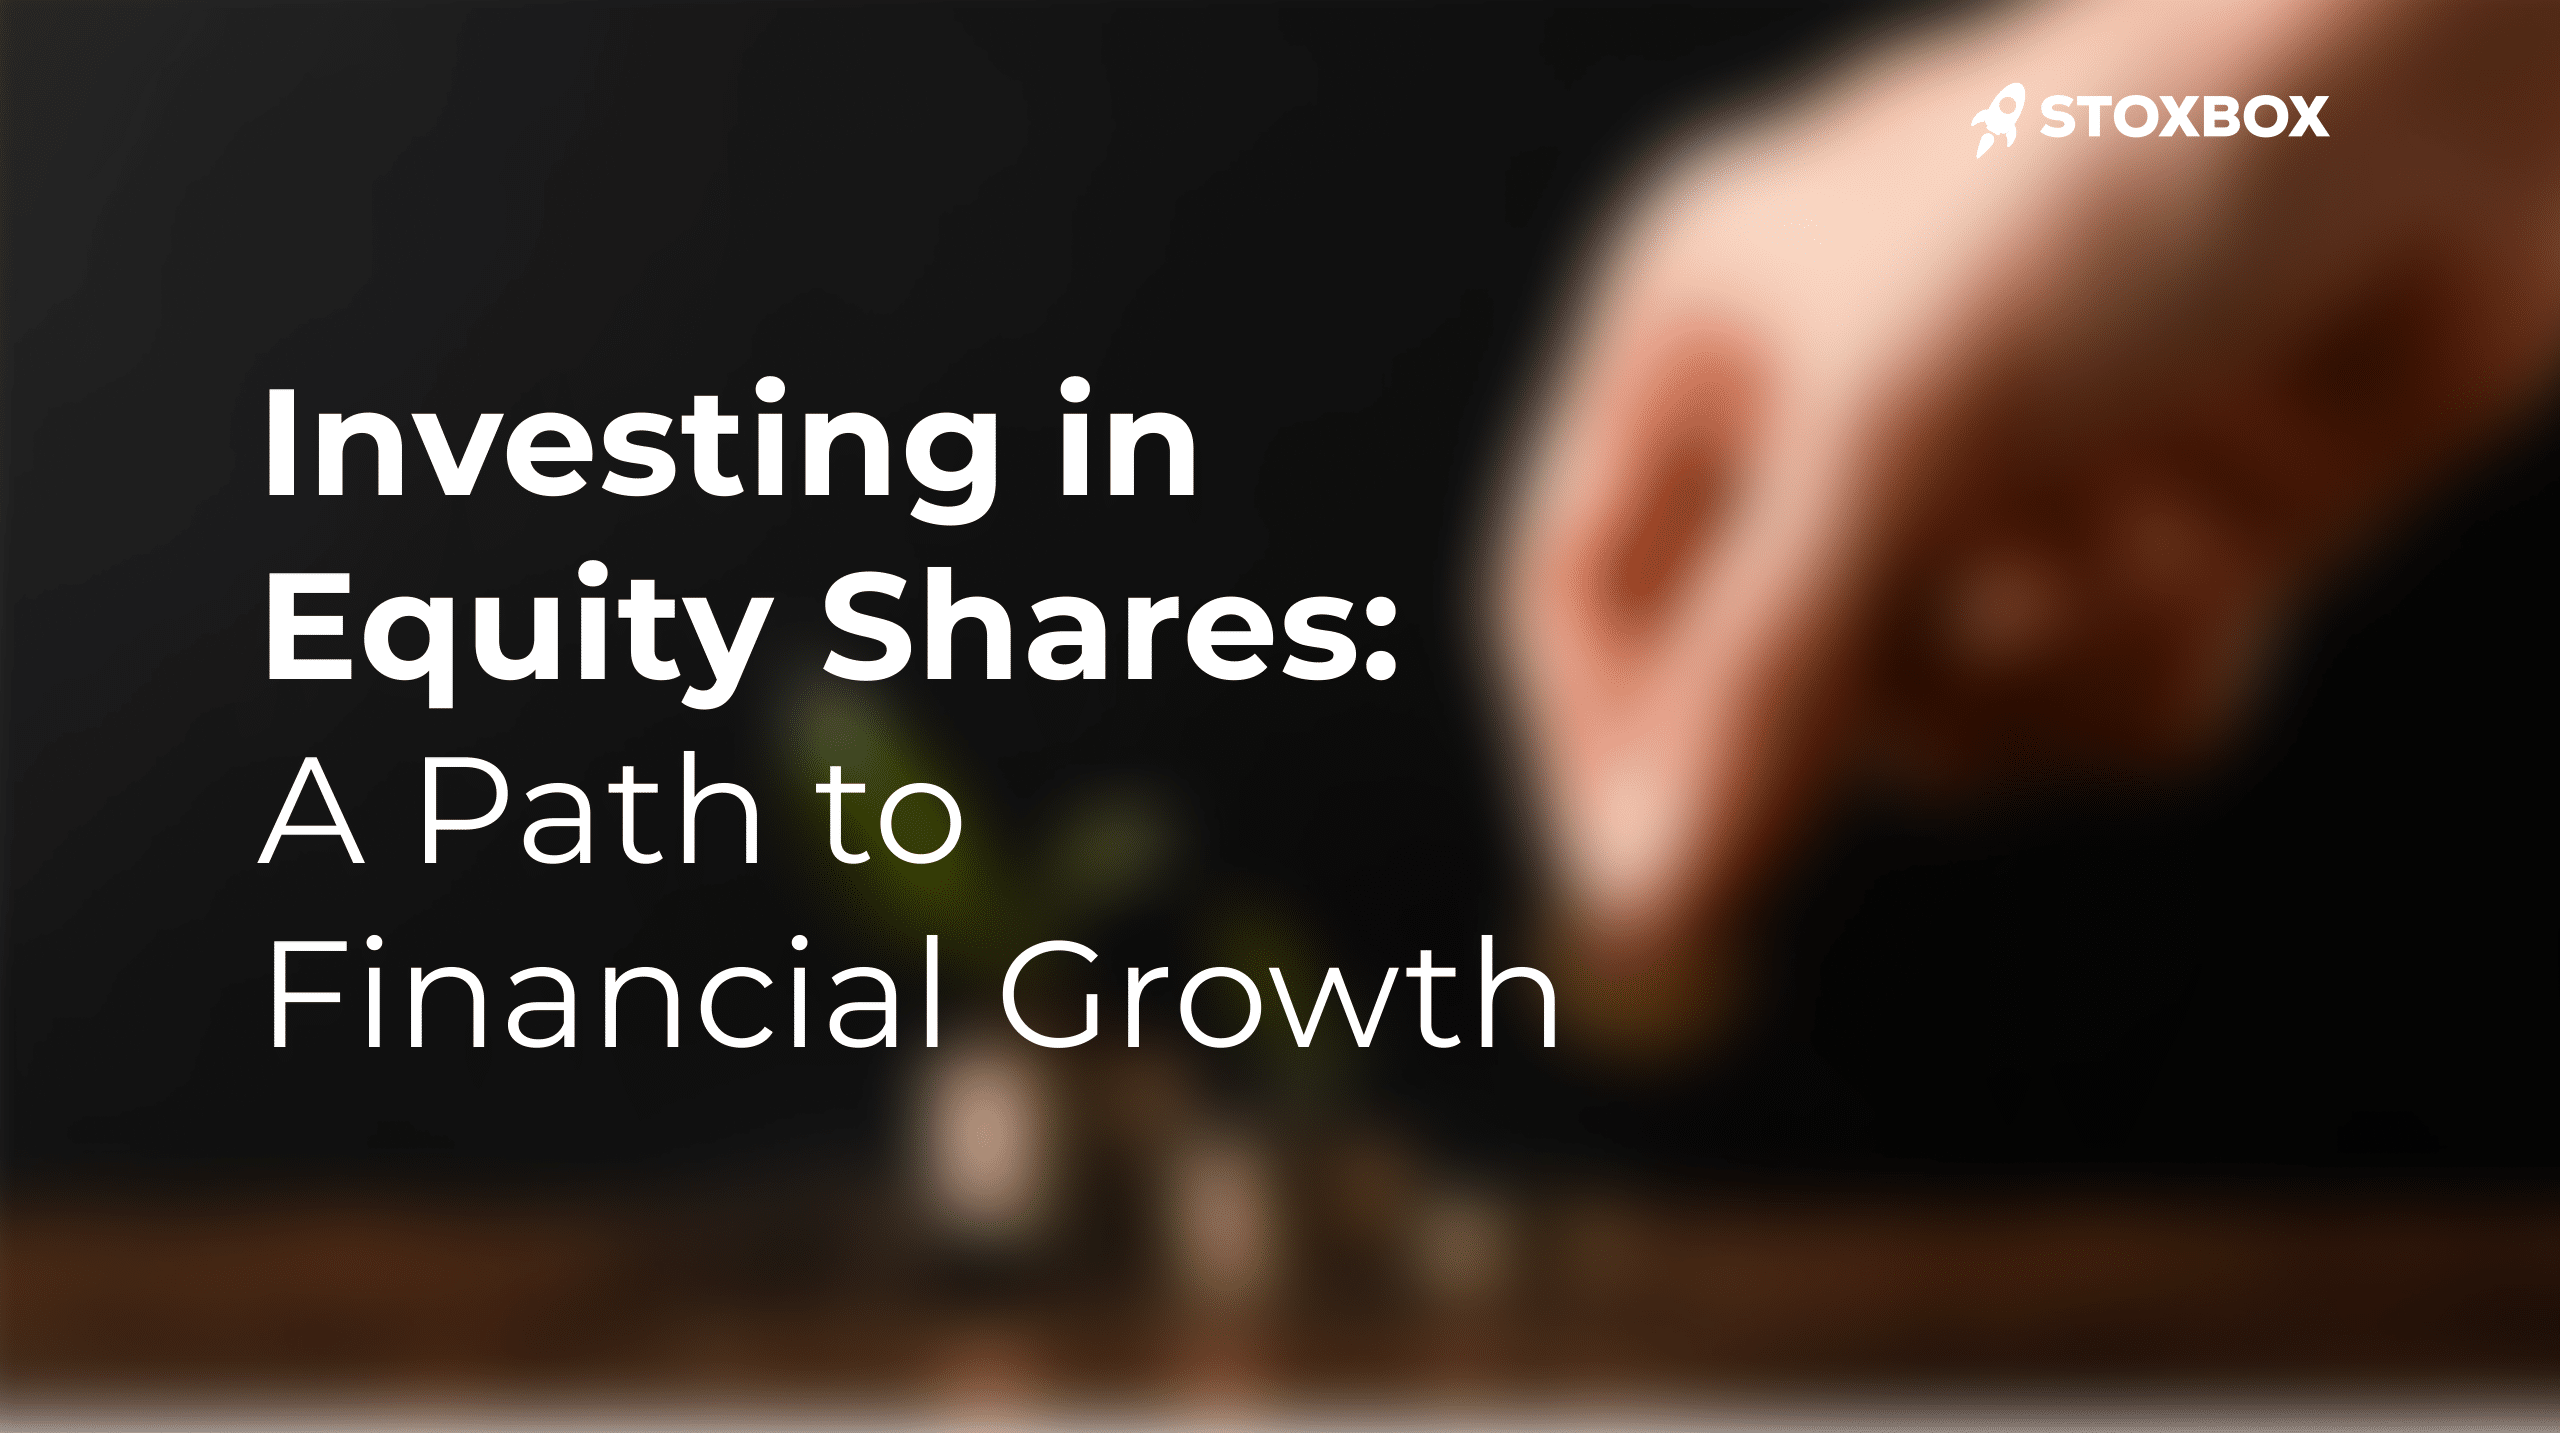 Investing Equity shares